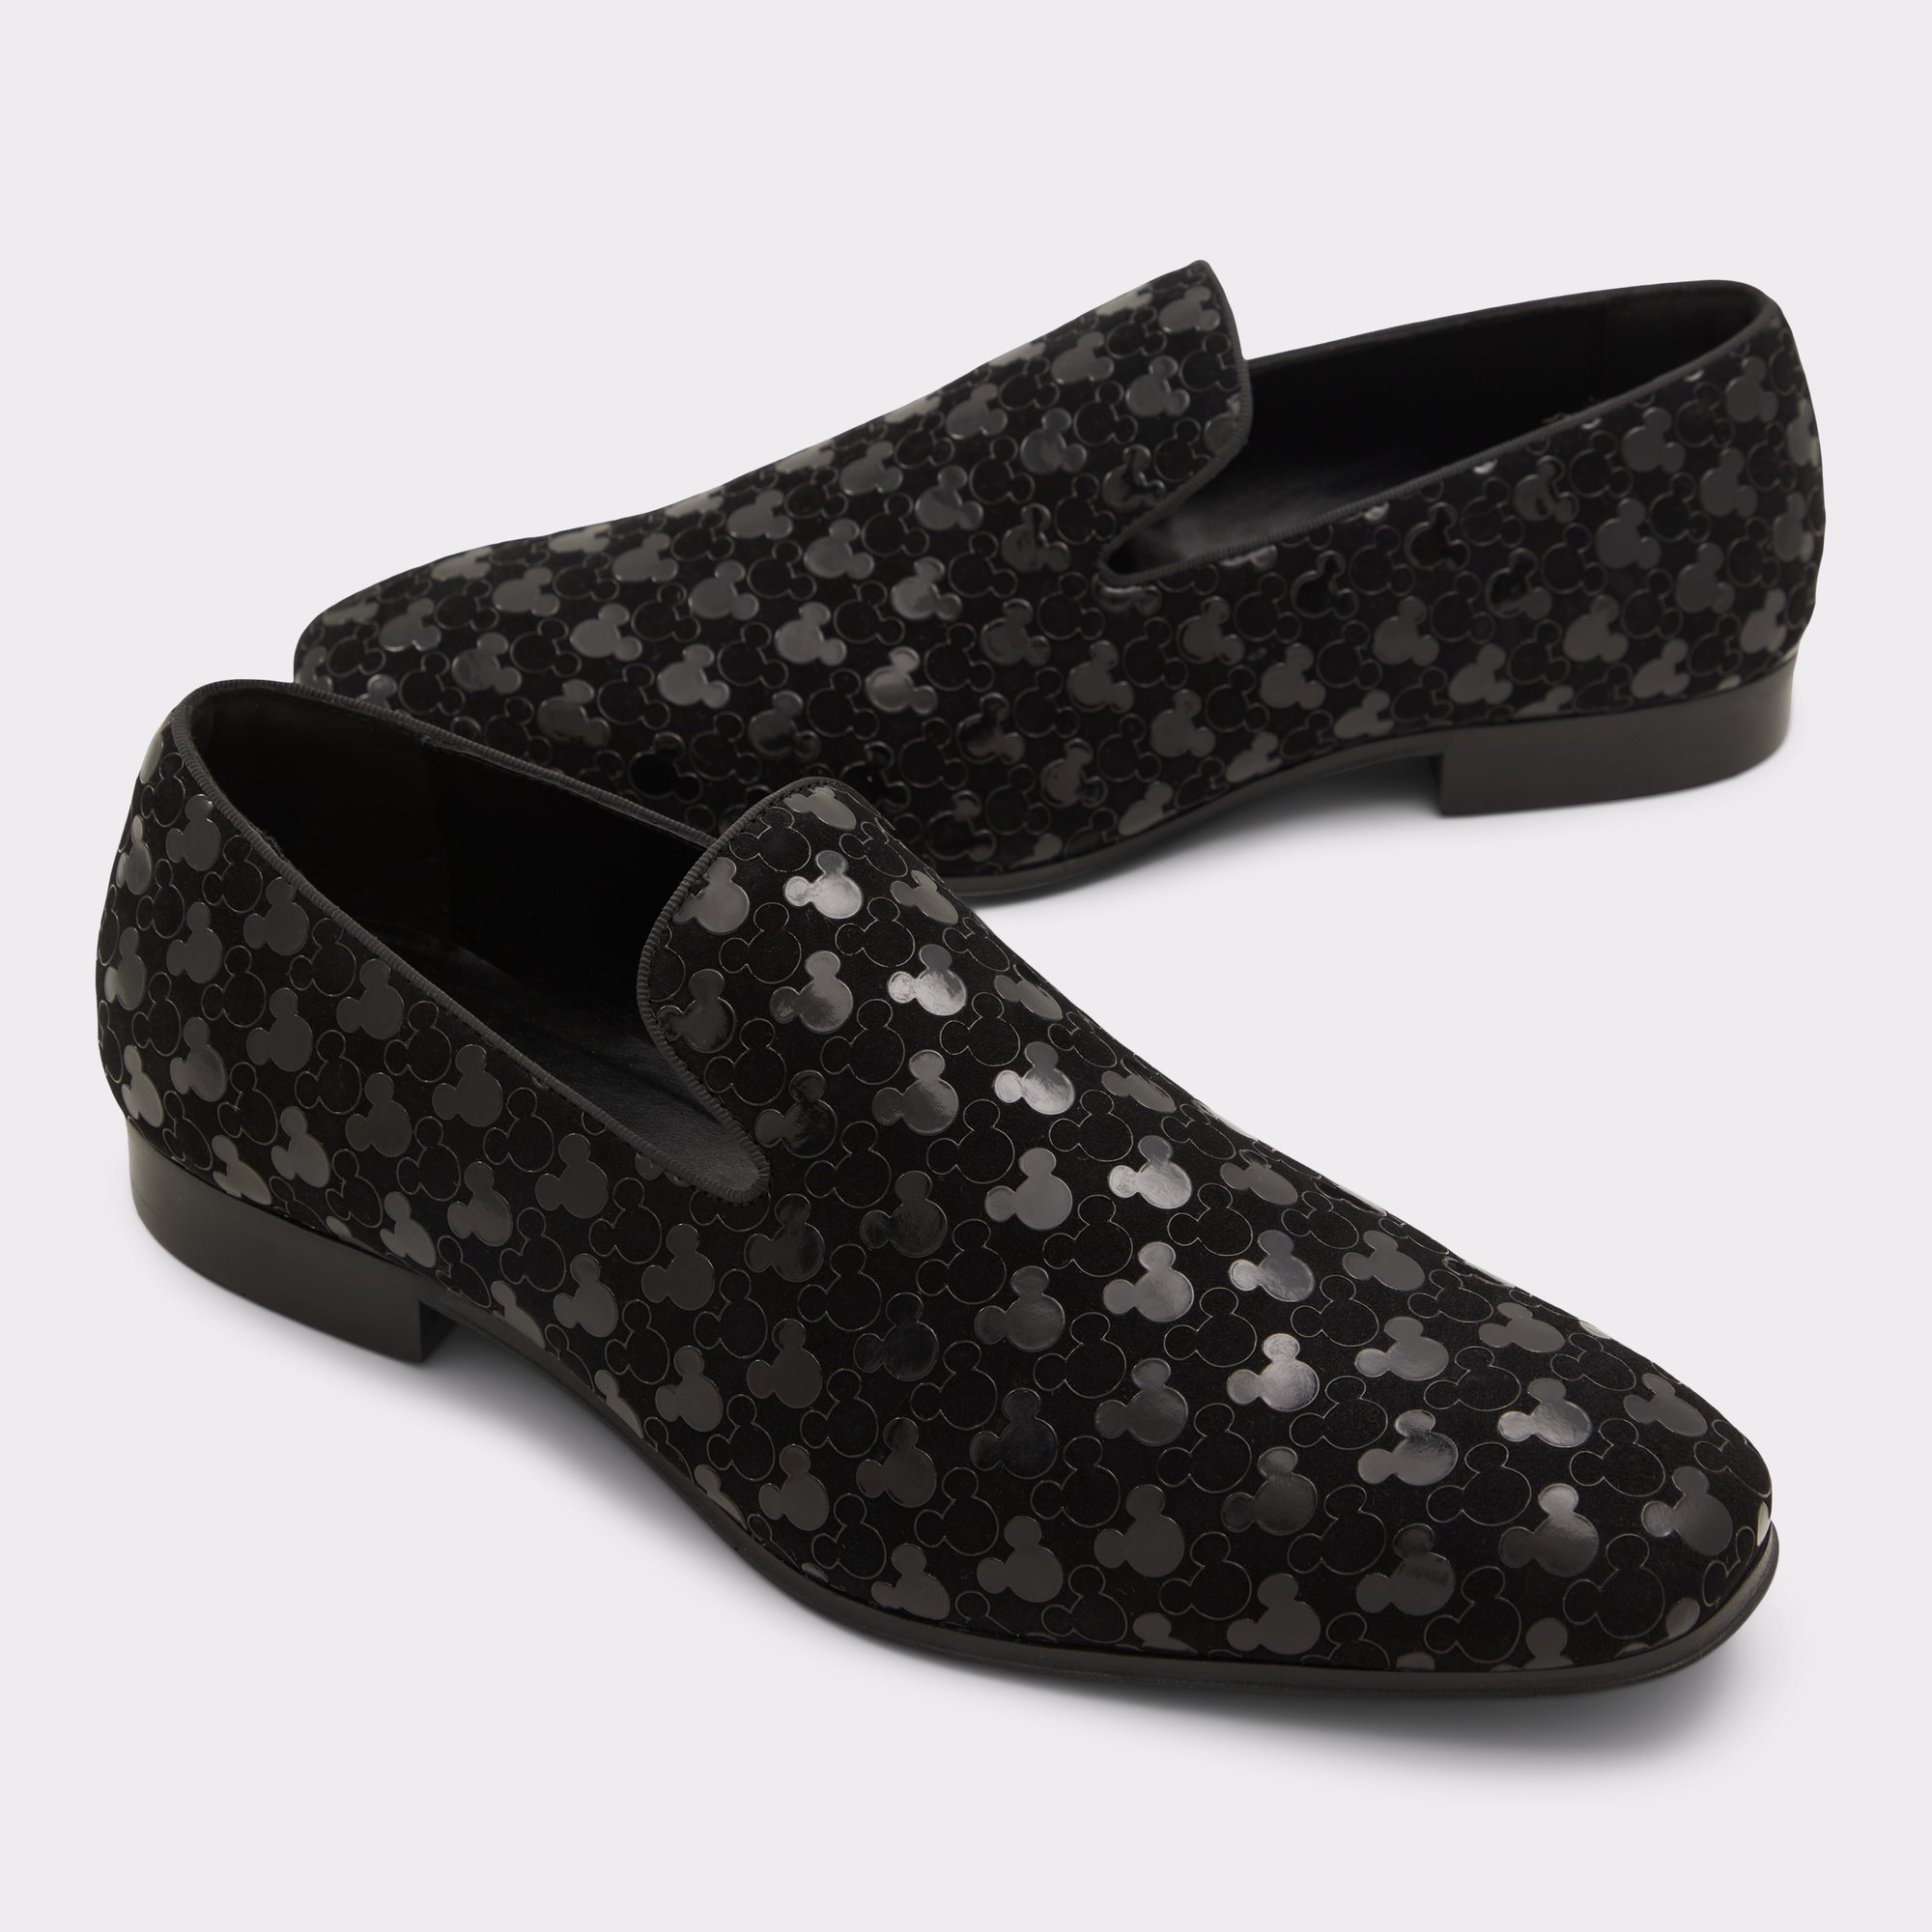 Louis Vuitton Mens Loafers & Slip-Ons, Black, 8 (Stock Confirmation Required)